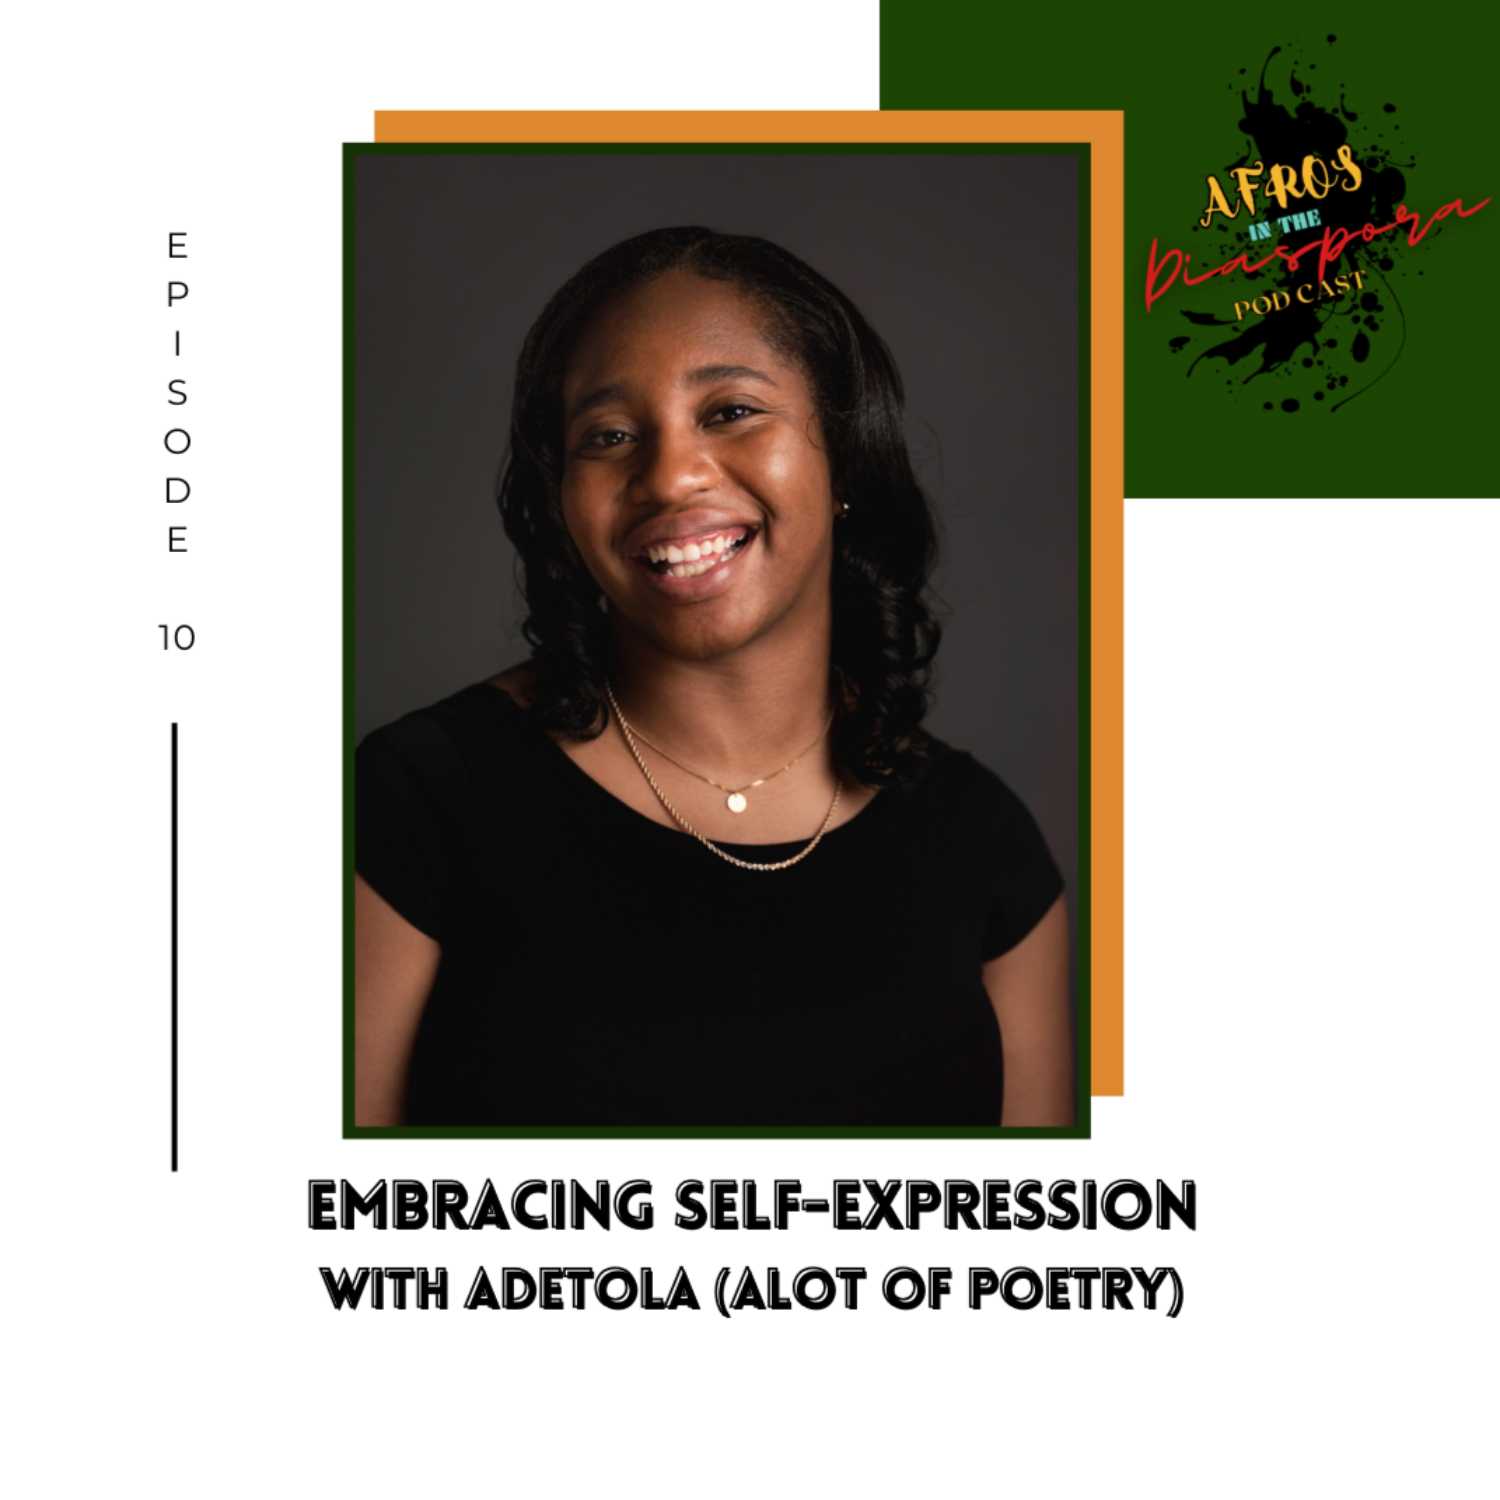 Embracing Self-Expression with Adetola aka aloT of Poetry